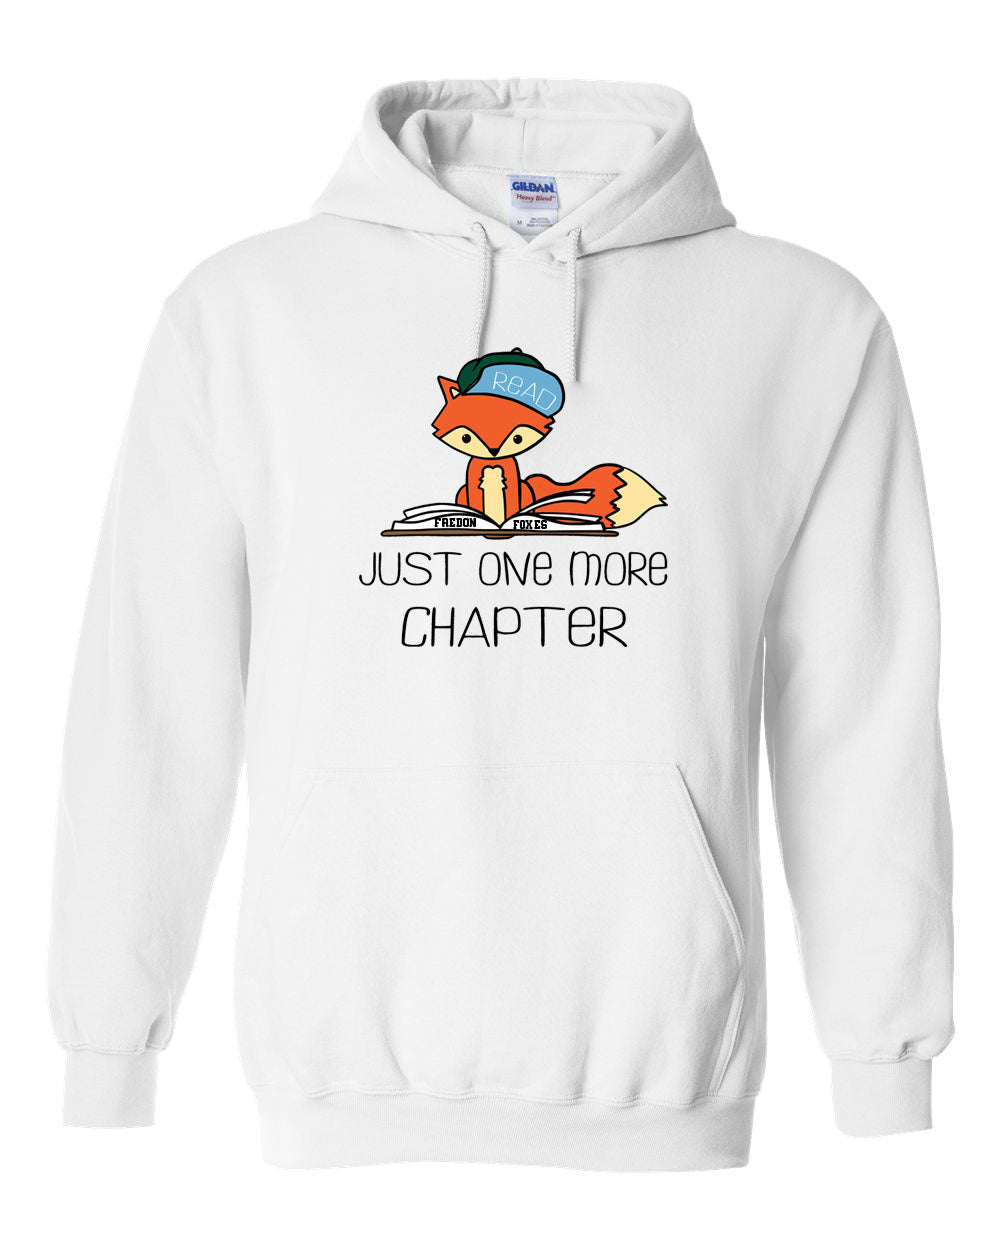 Just one more chapter Hooded Sweatshirt